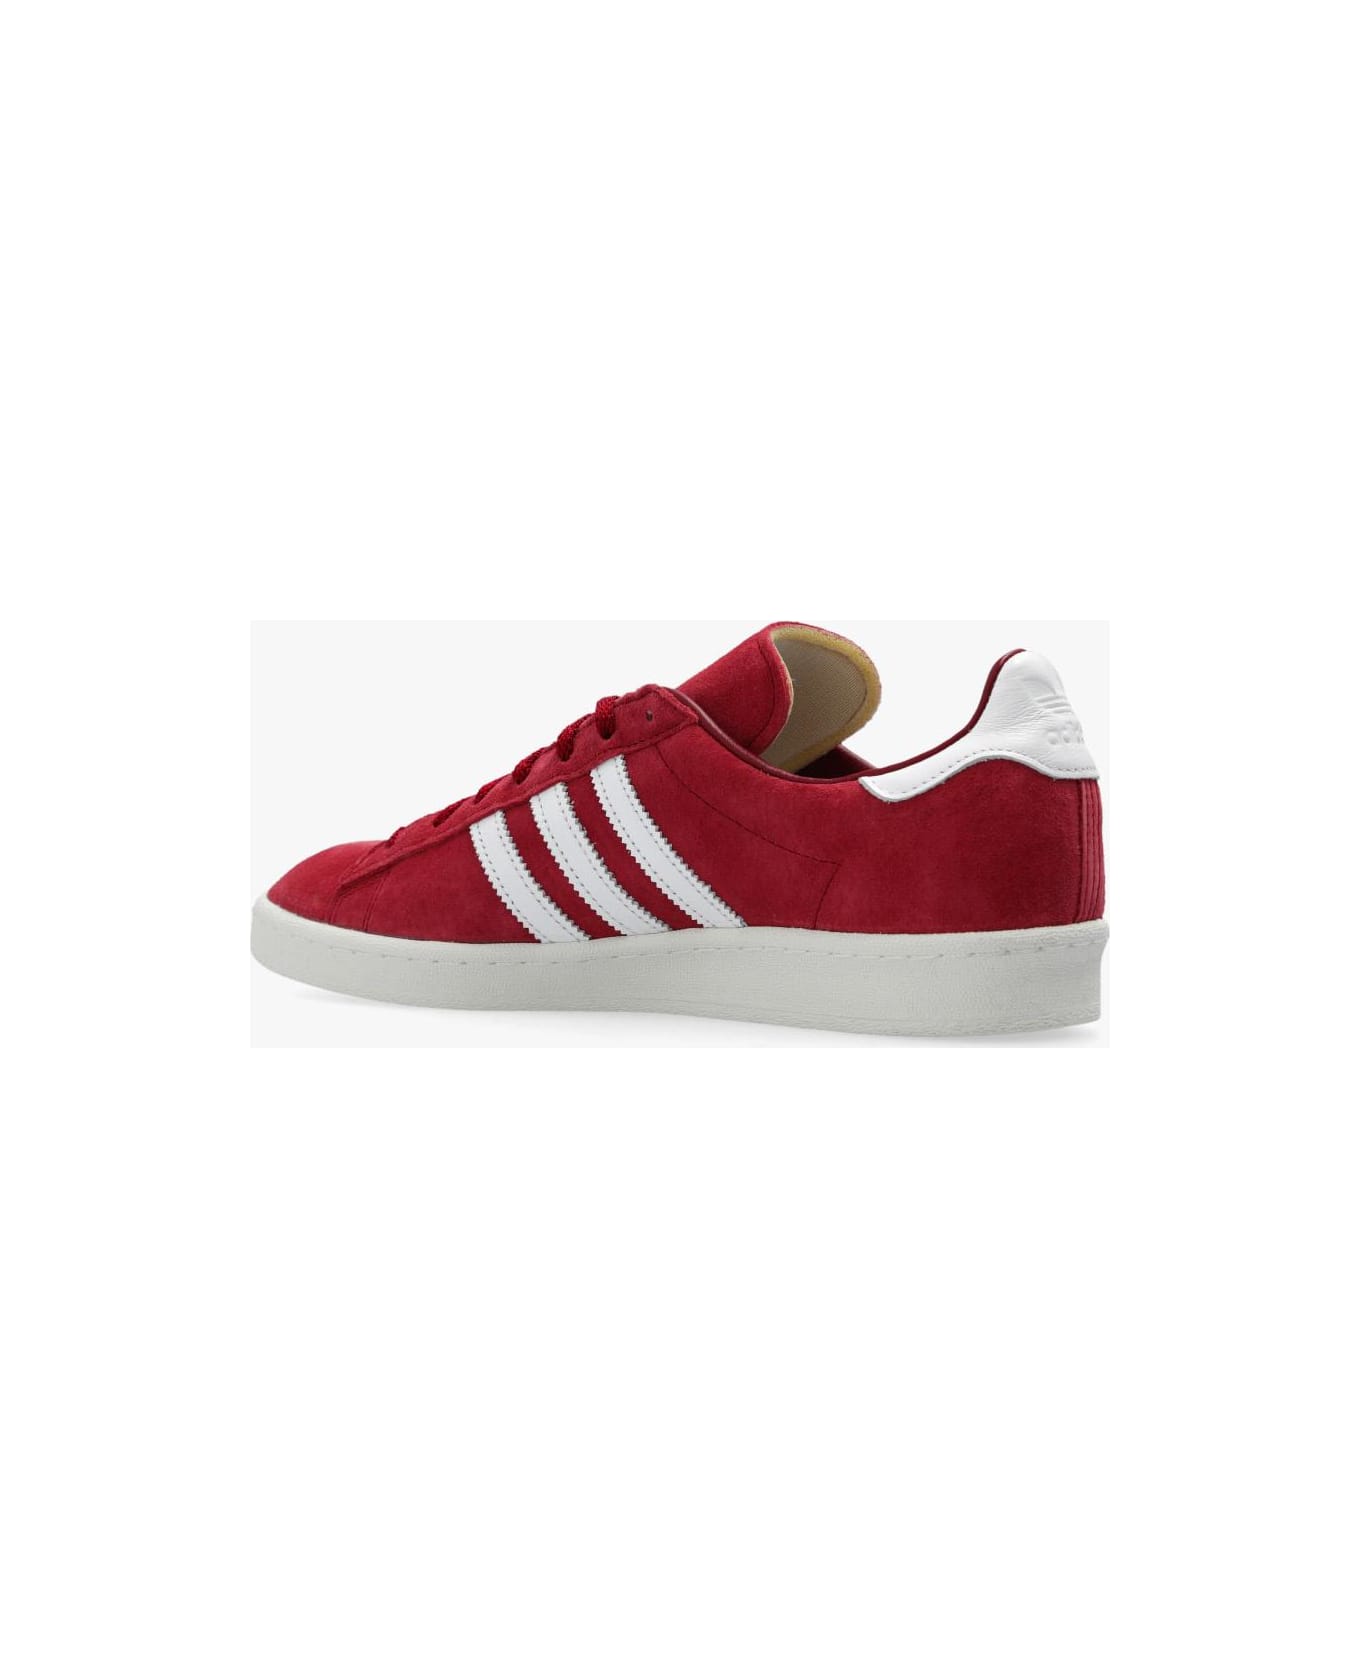 Adidas 'campus 80s' Sneakers - RED